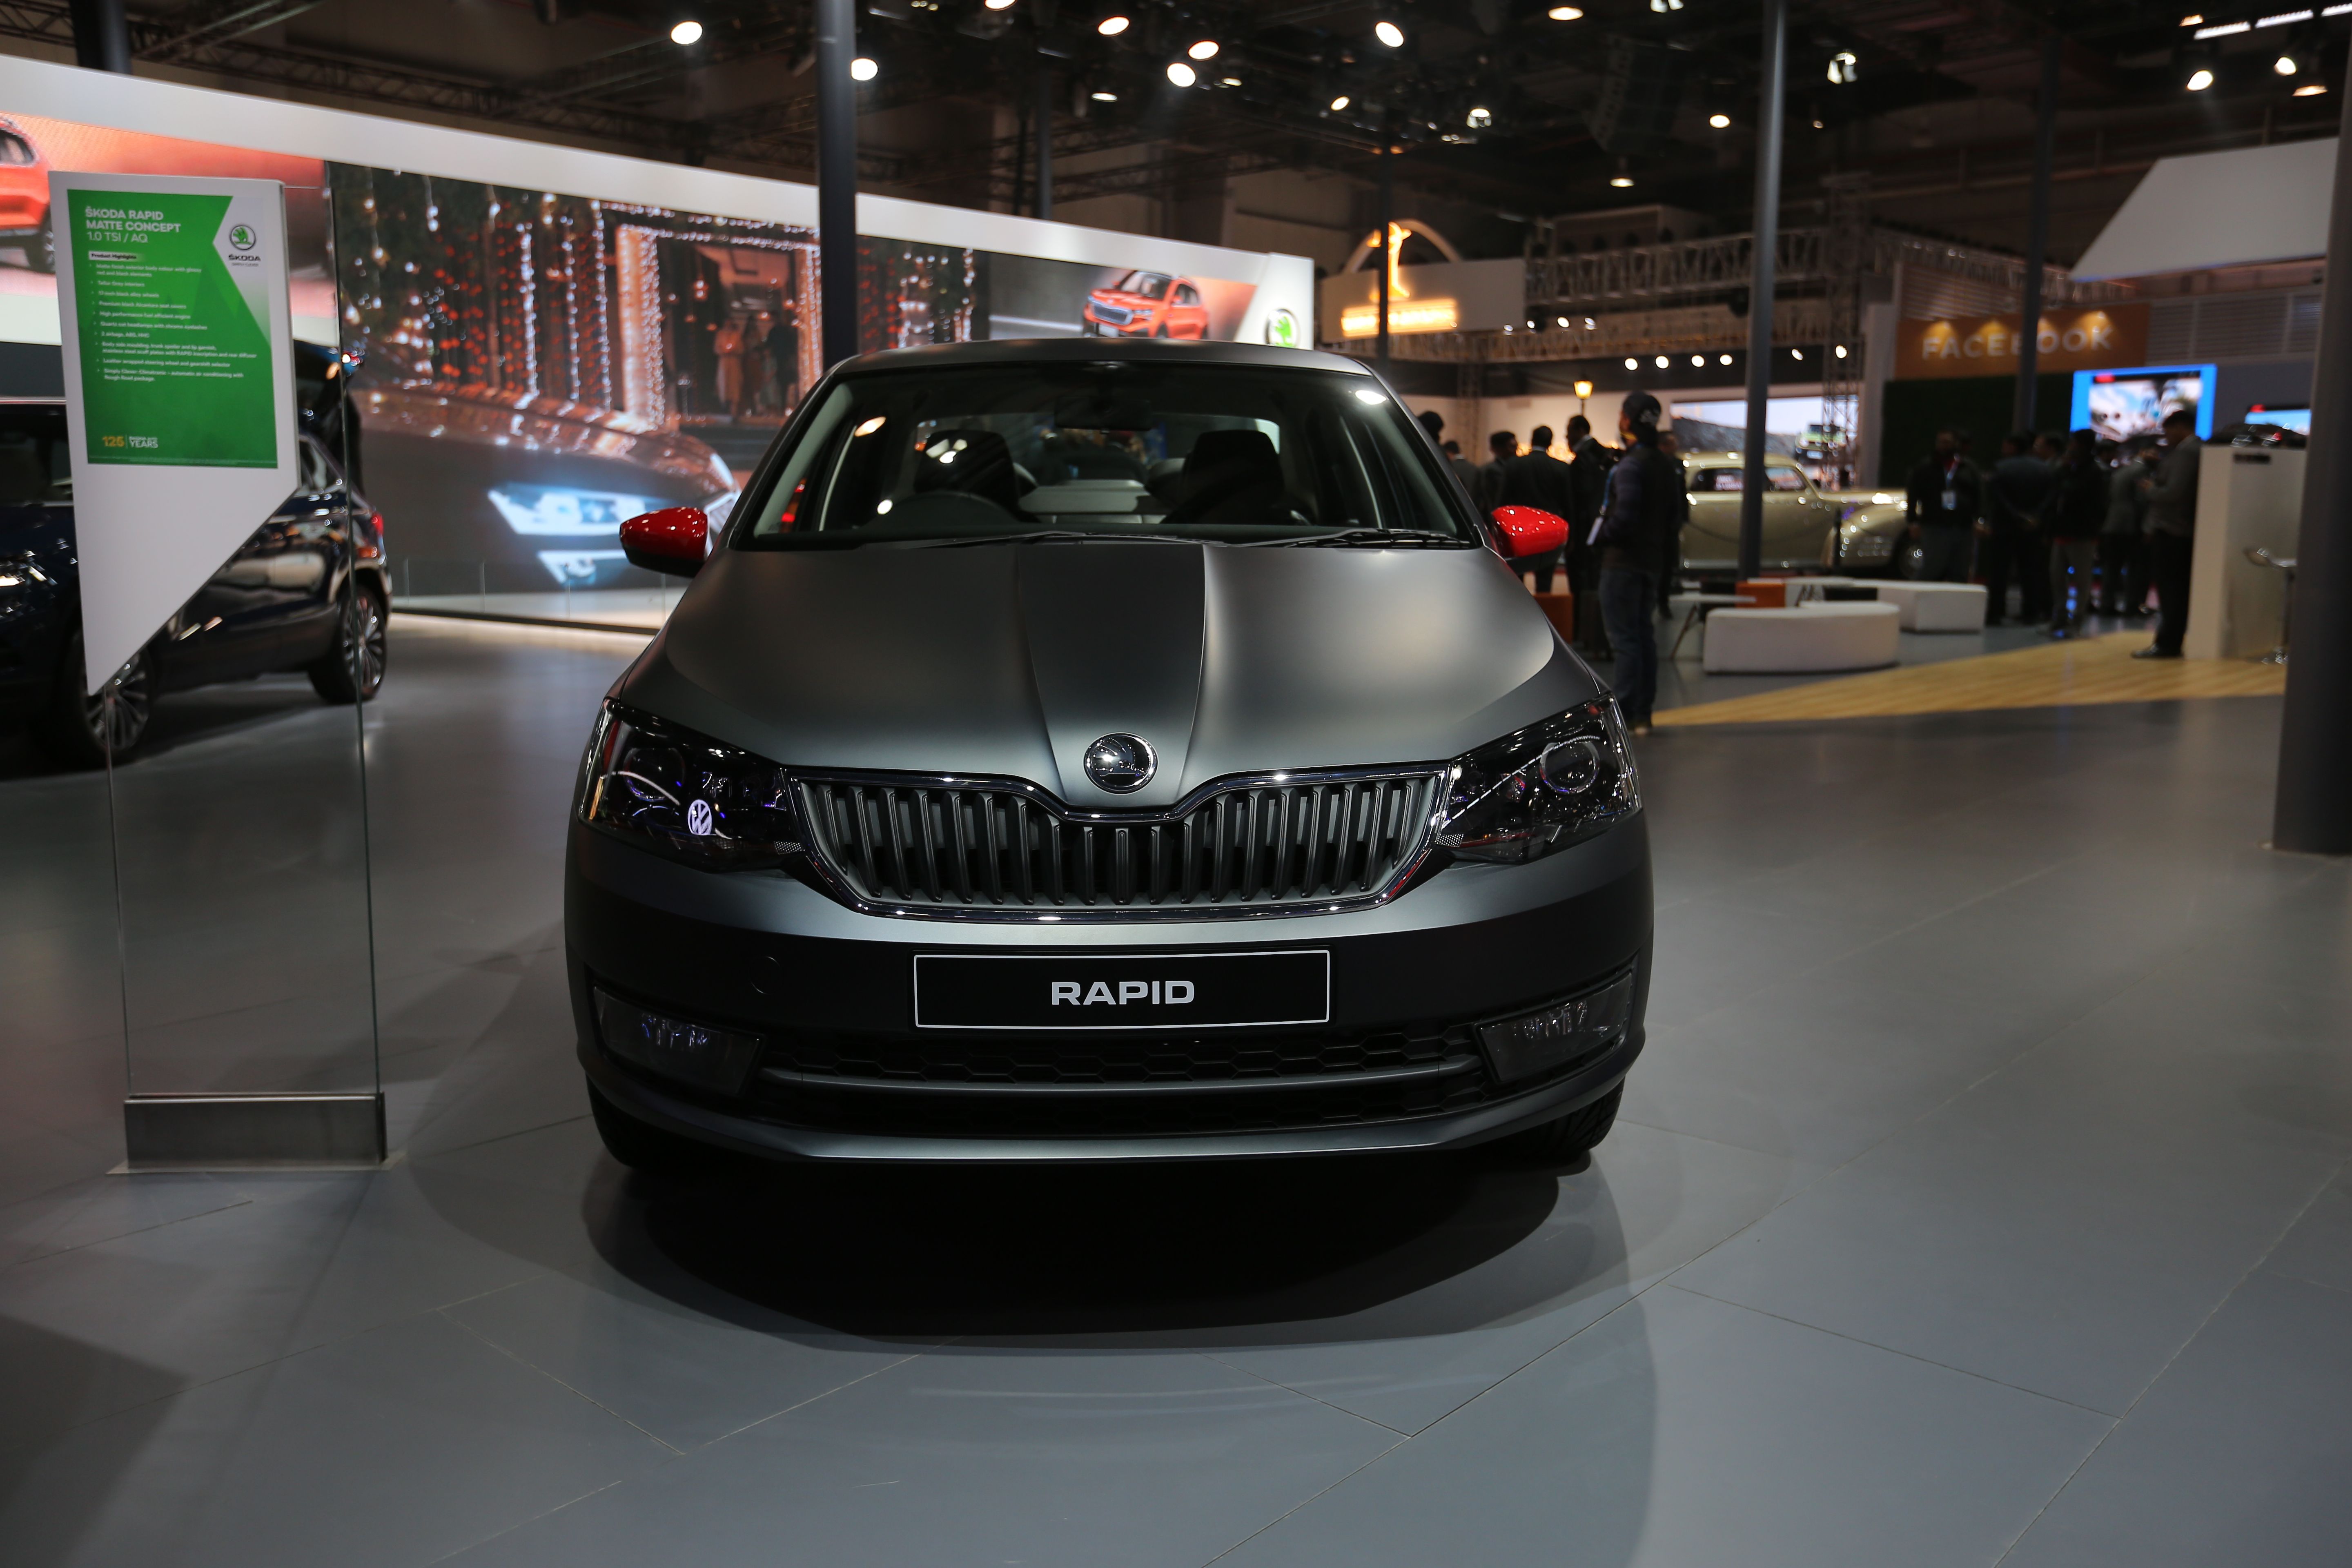 Skoda Rapid Matte Edition Details Revealed Ahead Of Launch